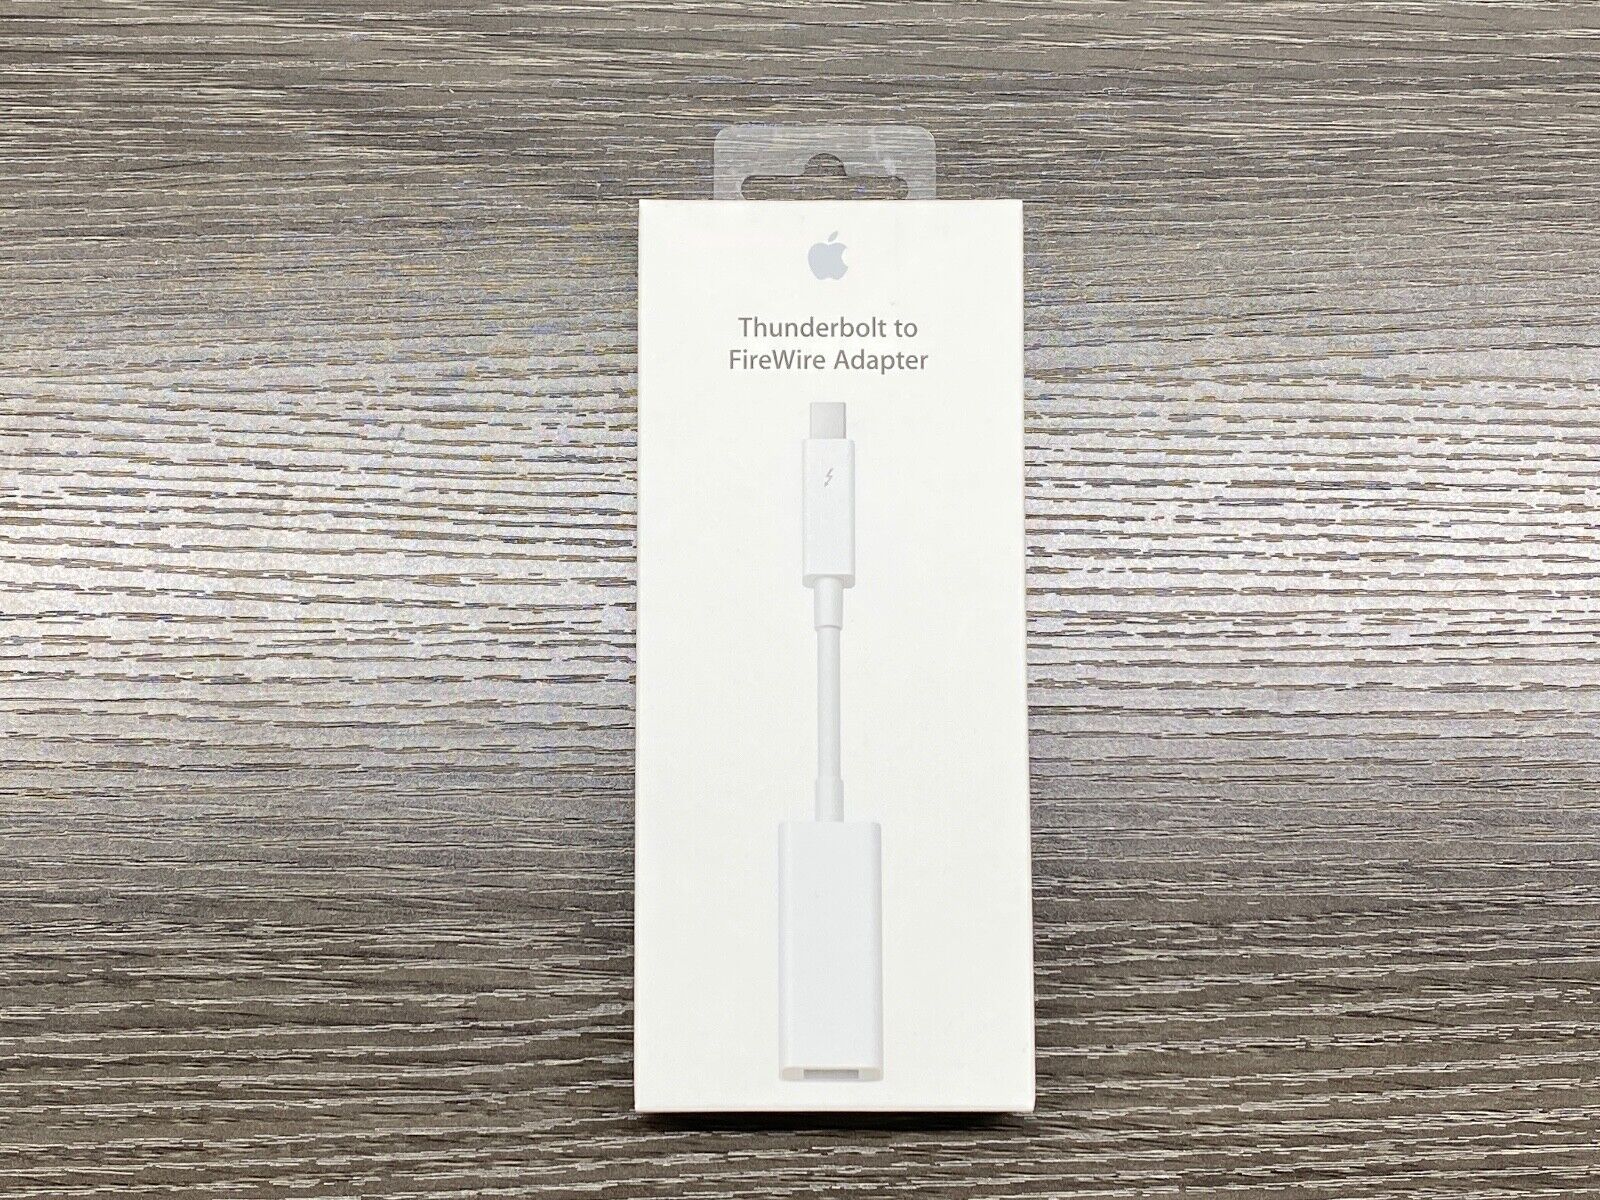 NEW SEALED BOX Apple Thunderbolt to FireWire Adapter Cable MD464LL/A A1463